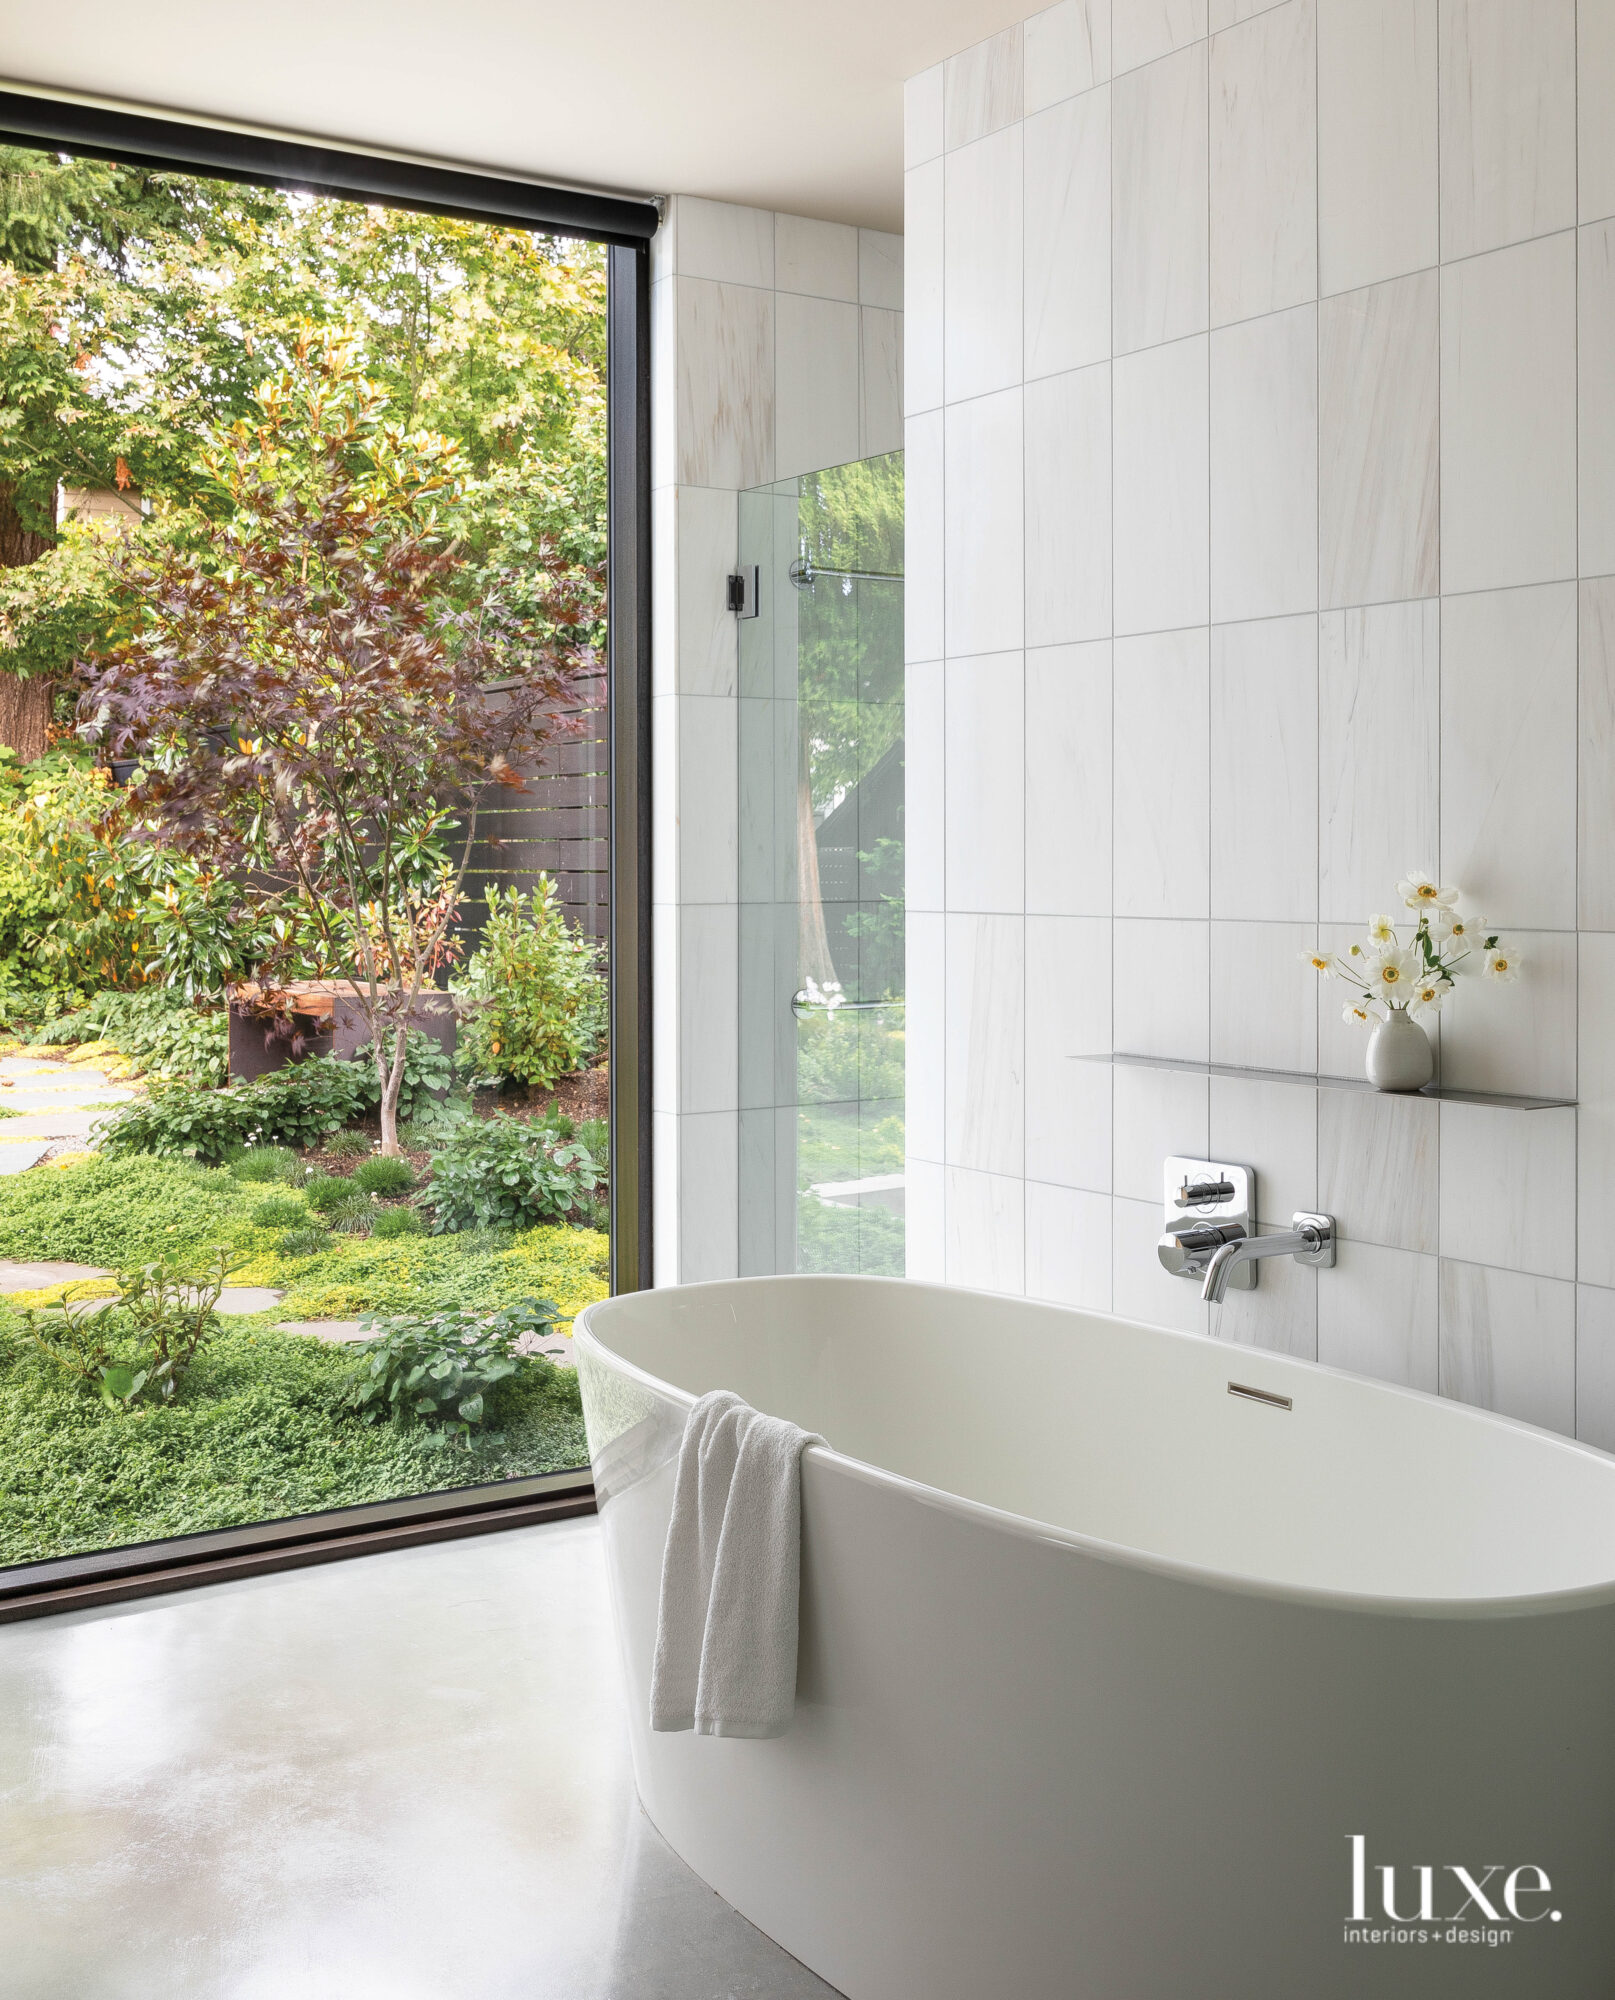 Main bath shot of freestanding tub with view to outside